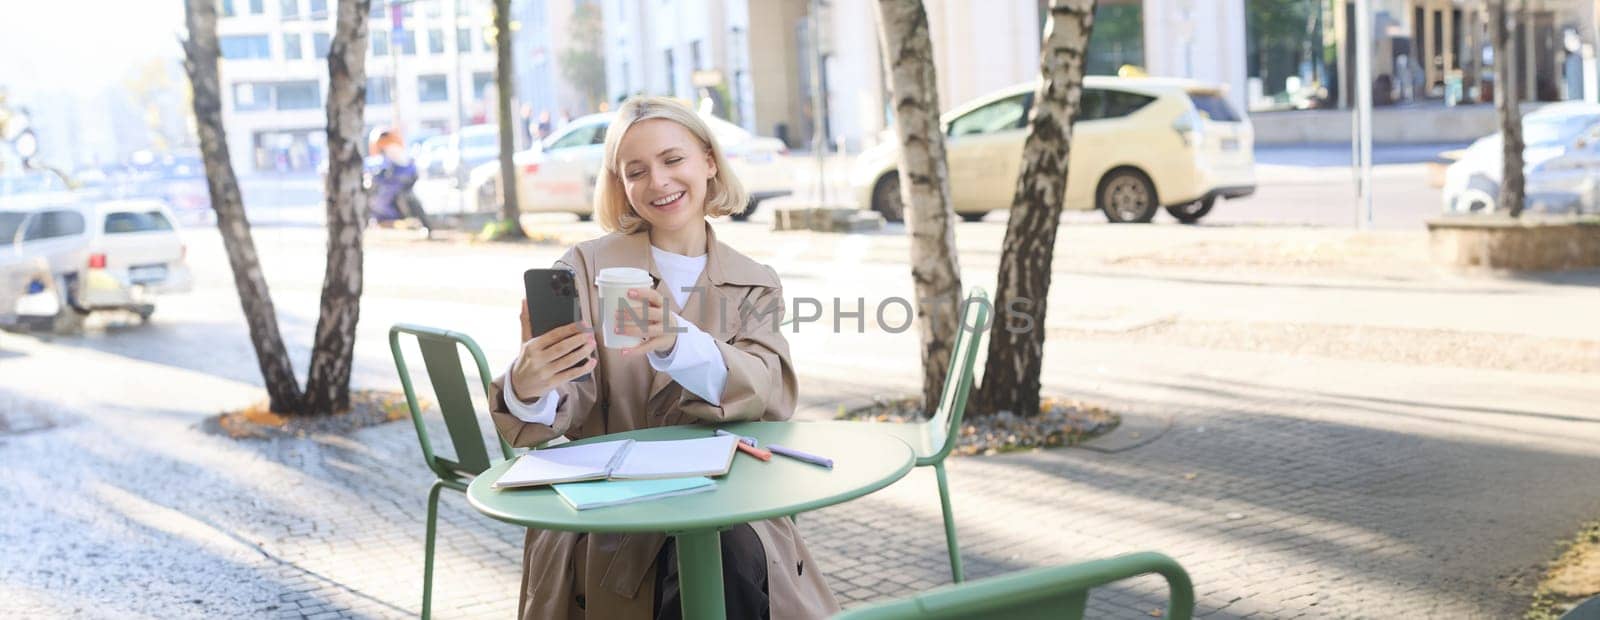 Lifestyle portrait of young woman has video conversation, chatting on smartphone app, showing takeaway cup while sitting outside in coffee shop.